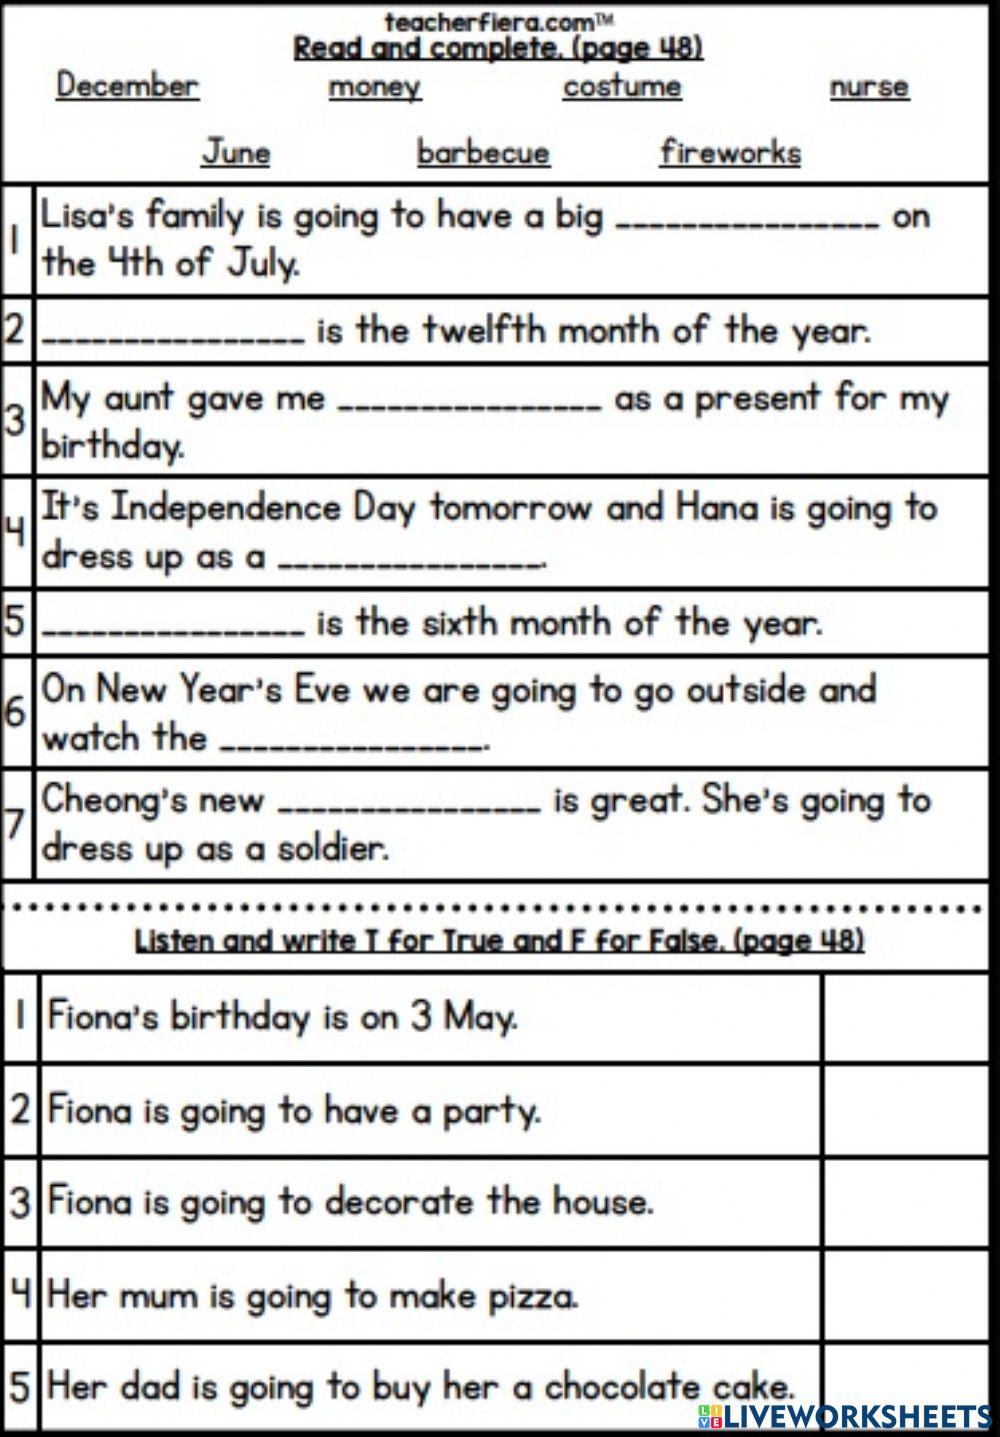 Cefr year 4 page 48